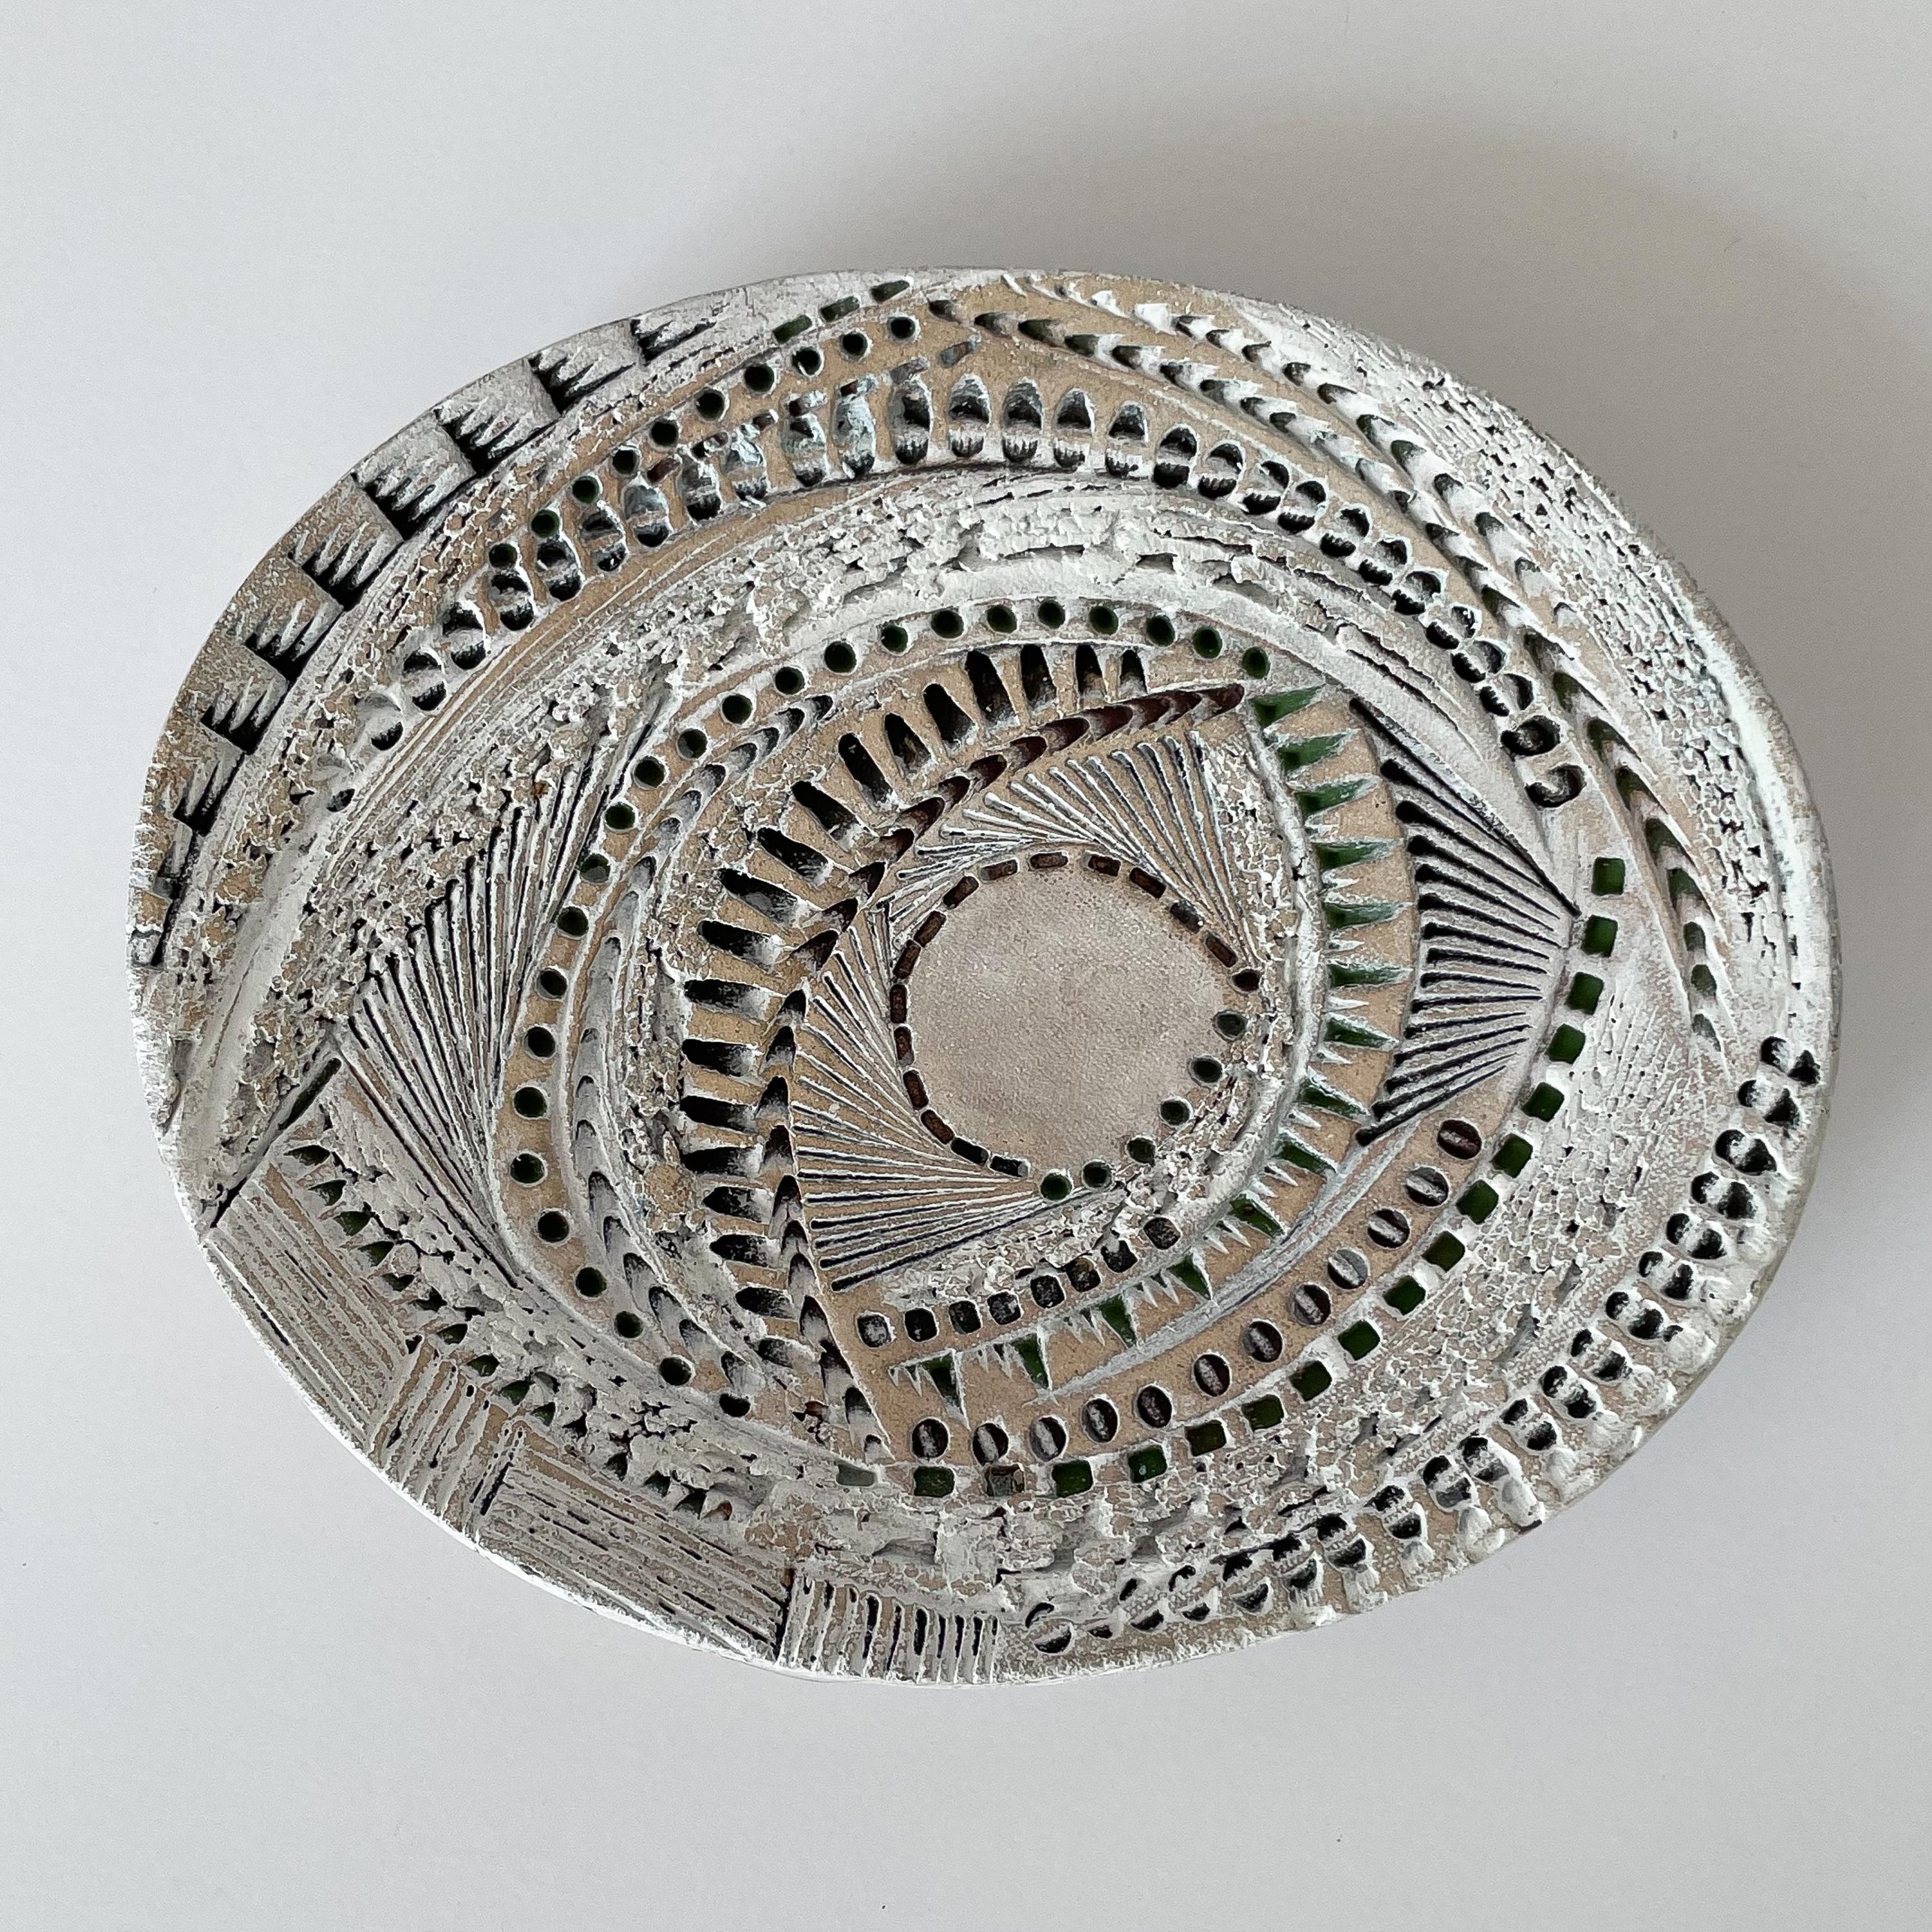 A studio pottery decorative footed dish by Barbara Haring, circa late 20th century. This ceramic dish features an intricate incised textured design. An abstract feather design and fishnet back. Glazed in white, green and black. Hints of the natural